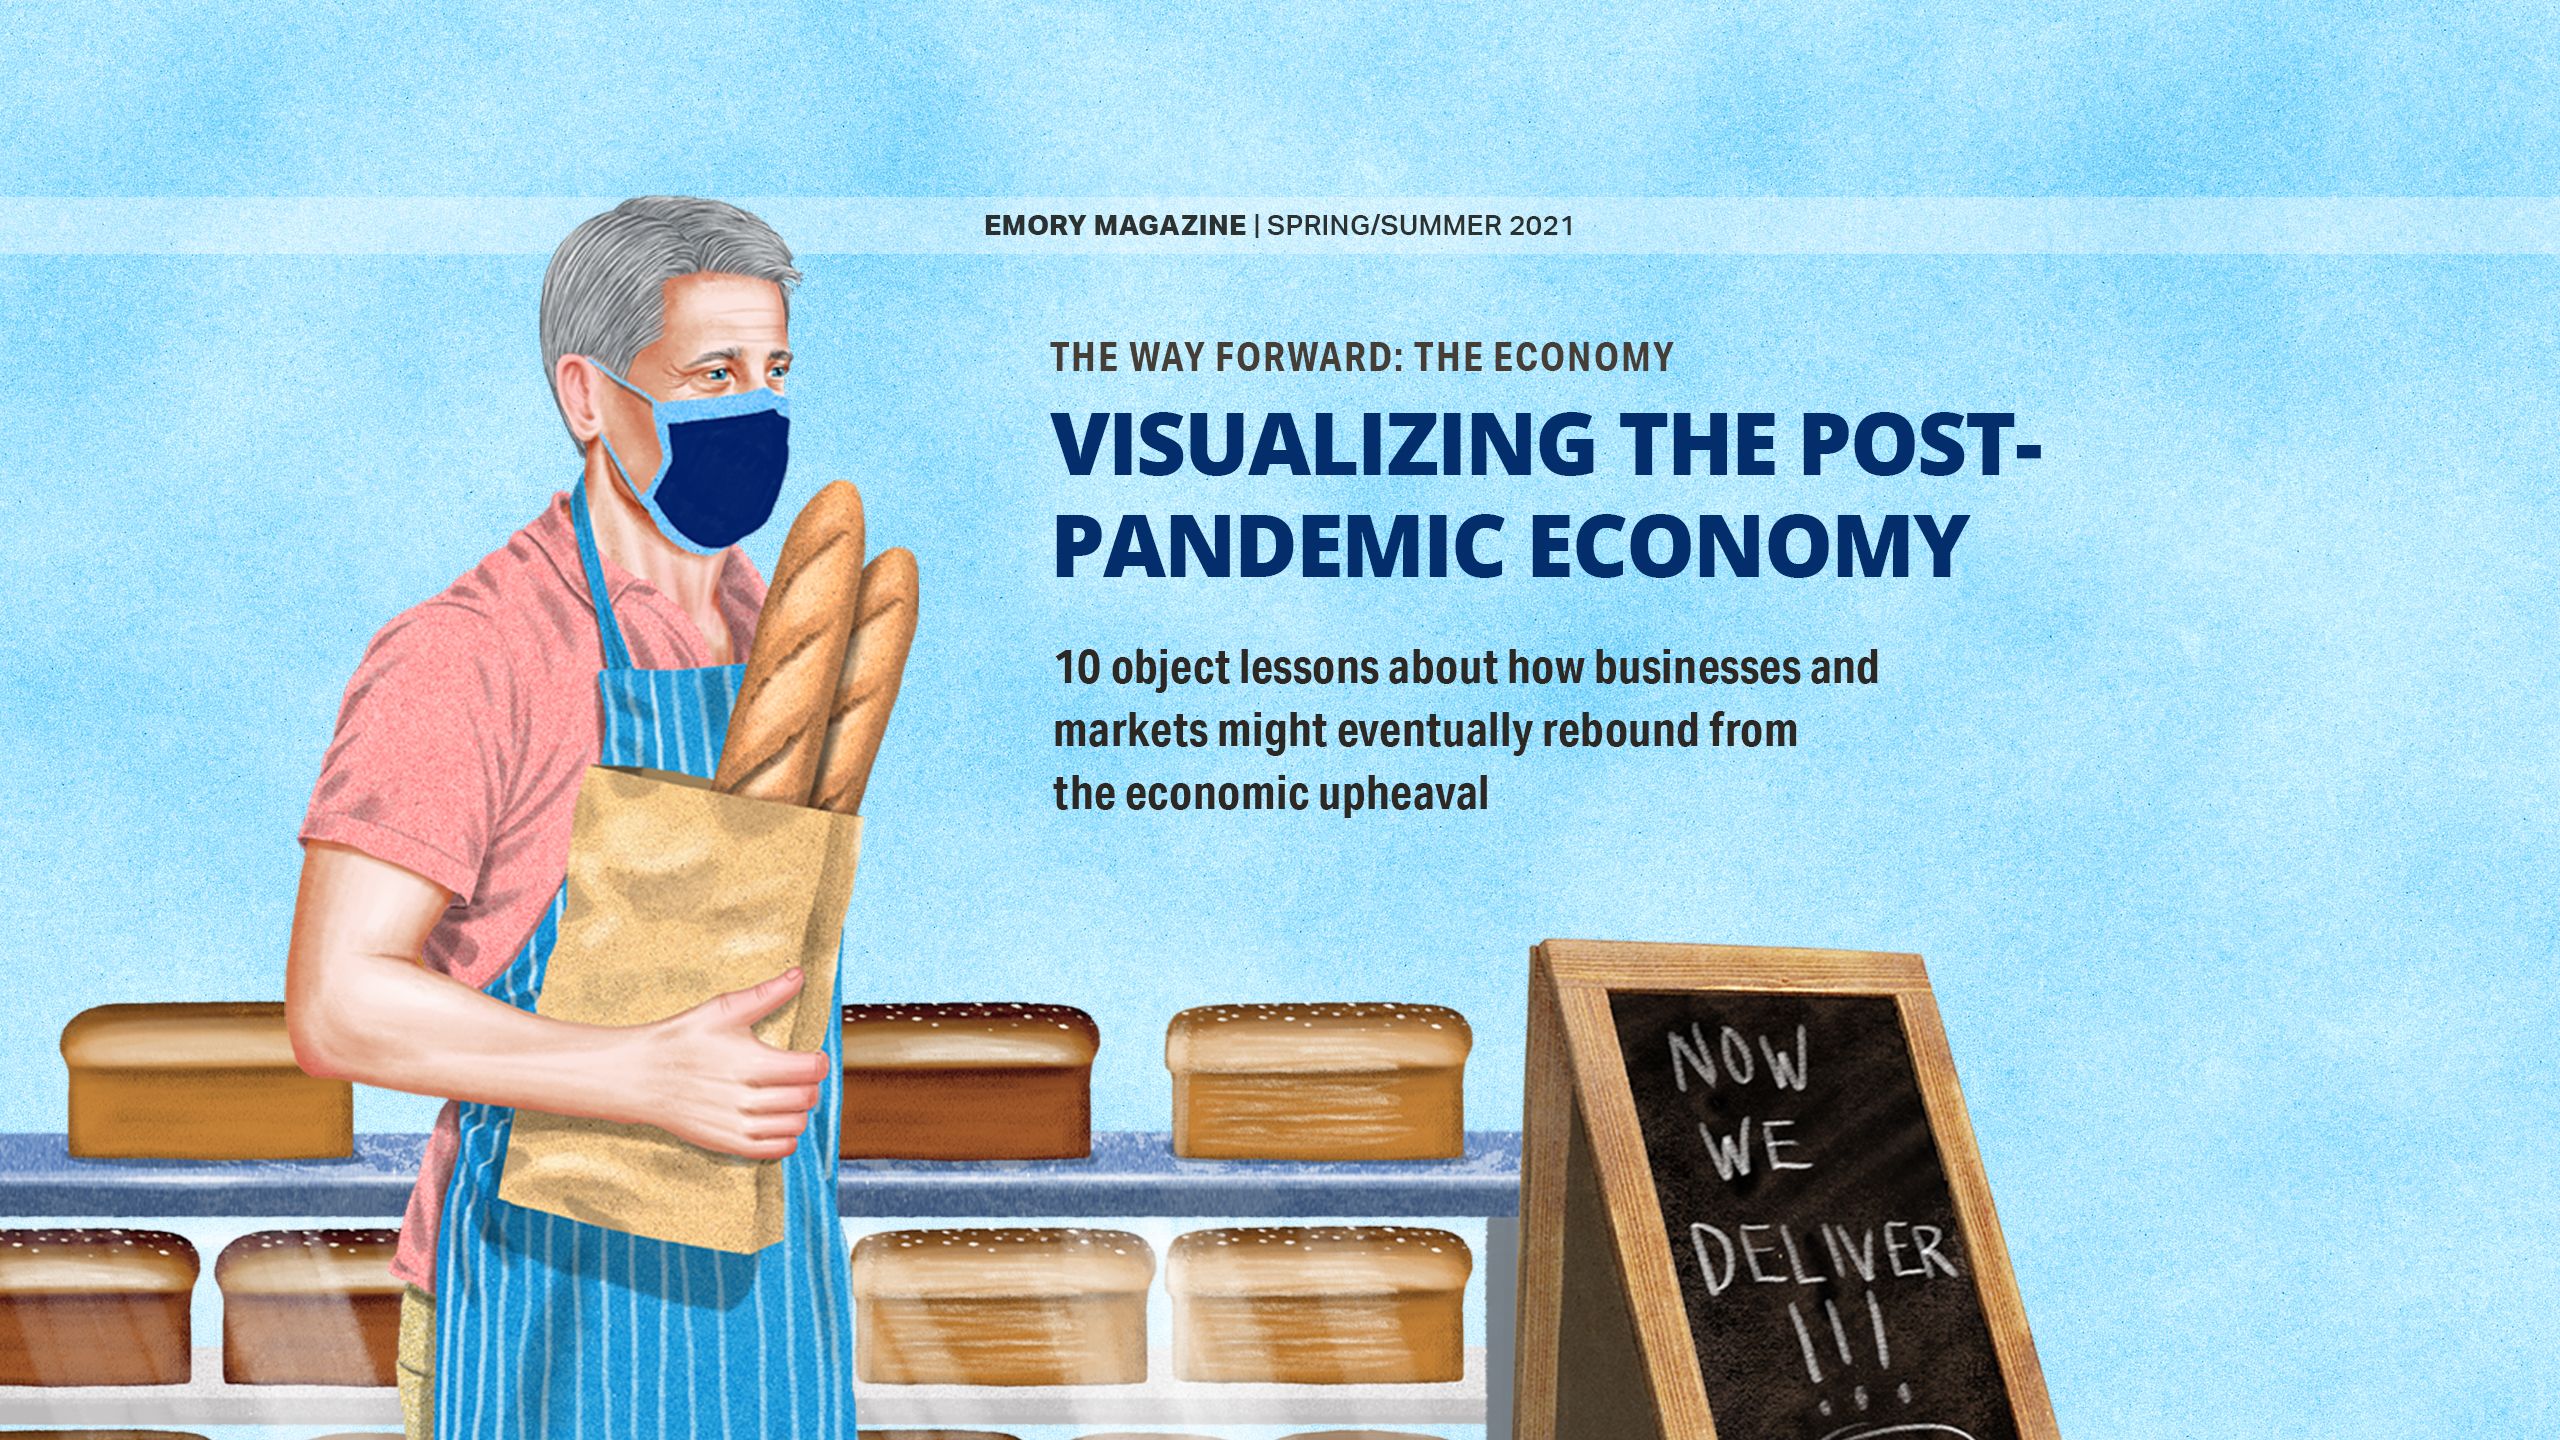 VISUALIZING THE POST-PANDEMIC ECONOMY 10 object lessons about how businesses and markets might eventually rebound from the economic upheaval of the past year.